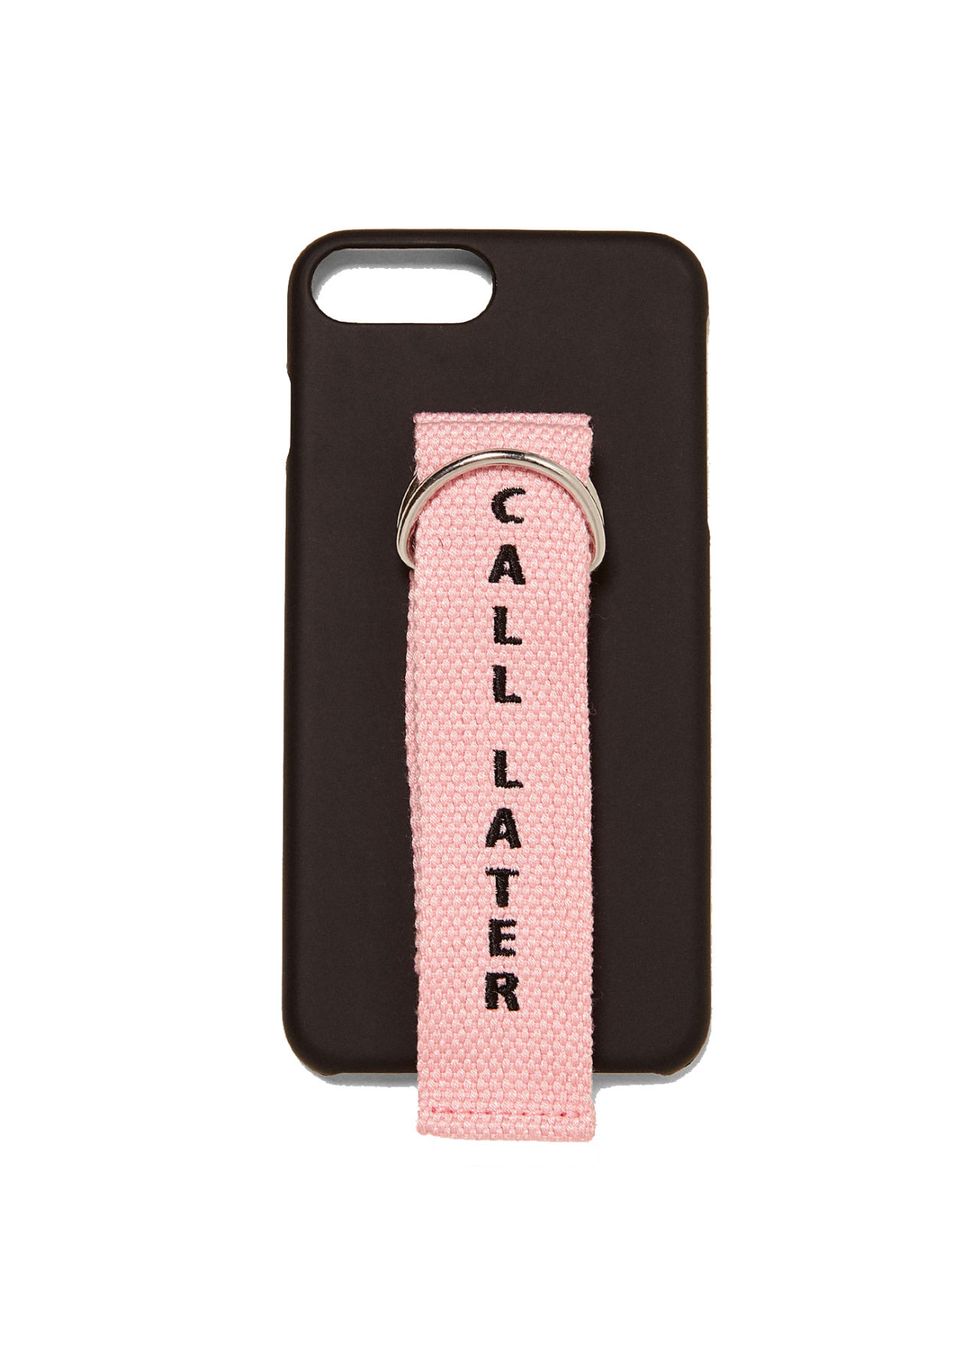 Mobile phone case, Mobile phone accessories, Pink, Material property, Font, Technology, Case, Electronic device, Mobile phone, Gadget, 